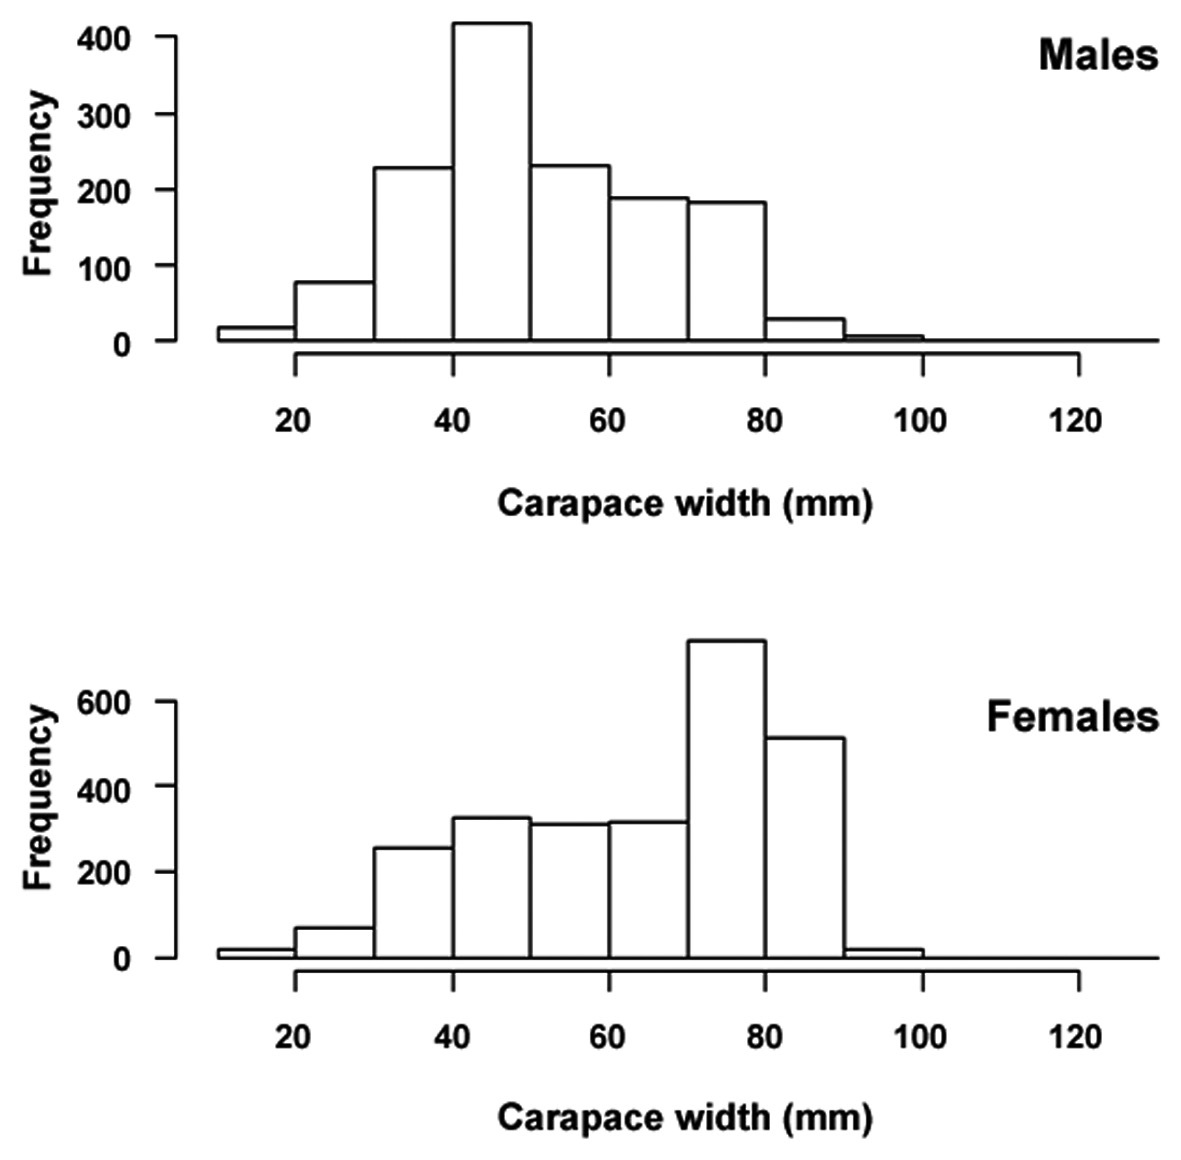 The carapace width distribution, combined over all tows, by sex.